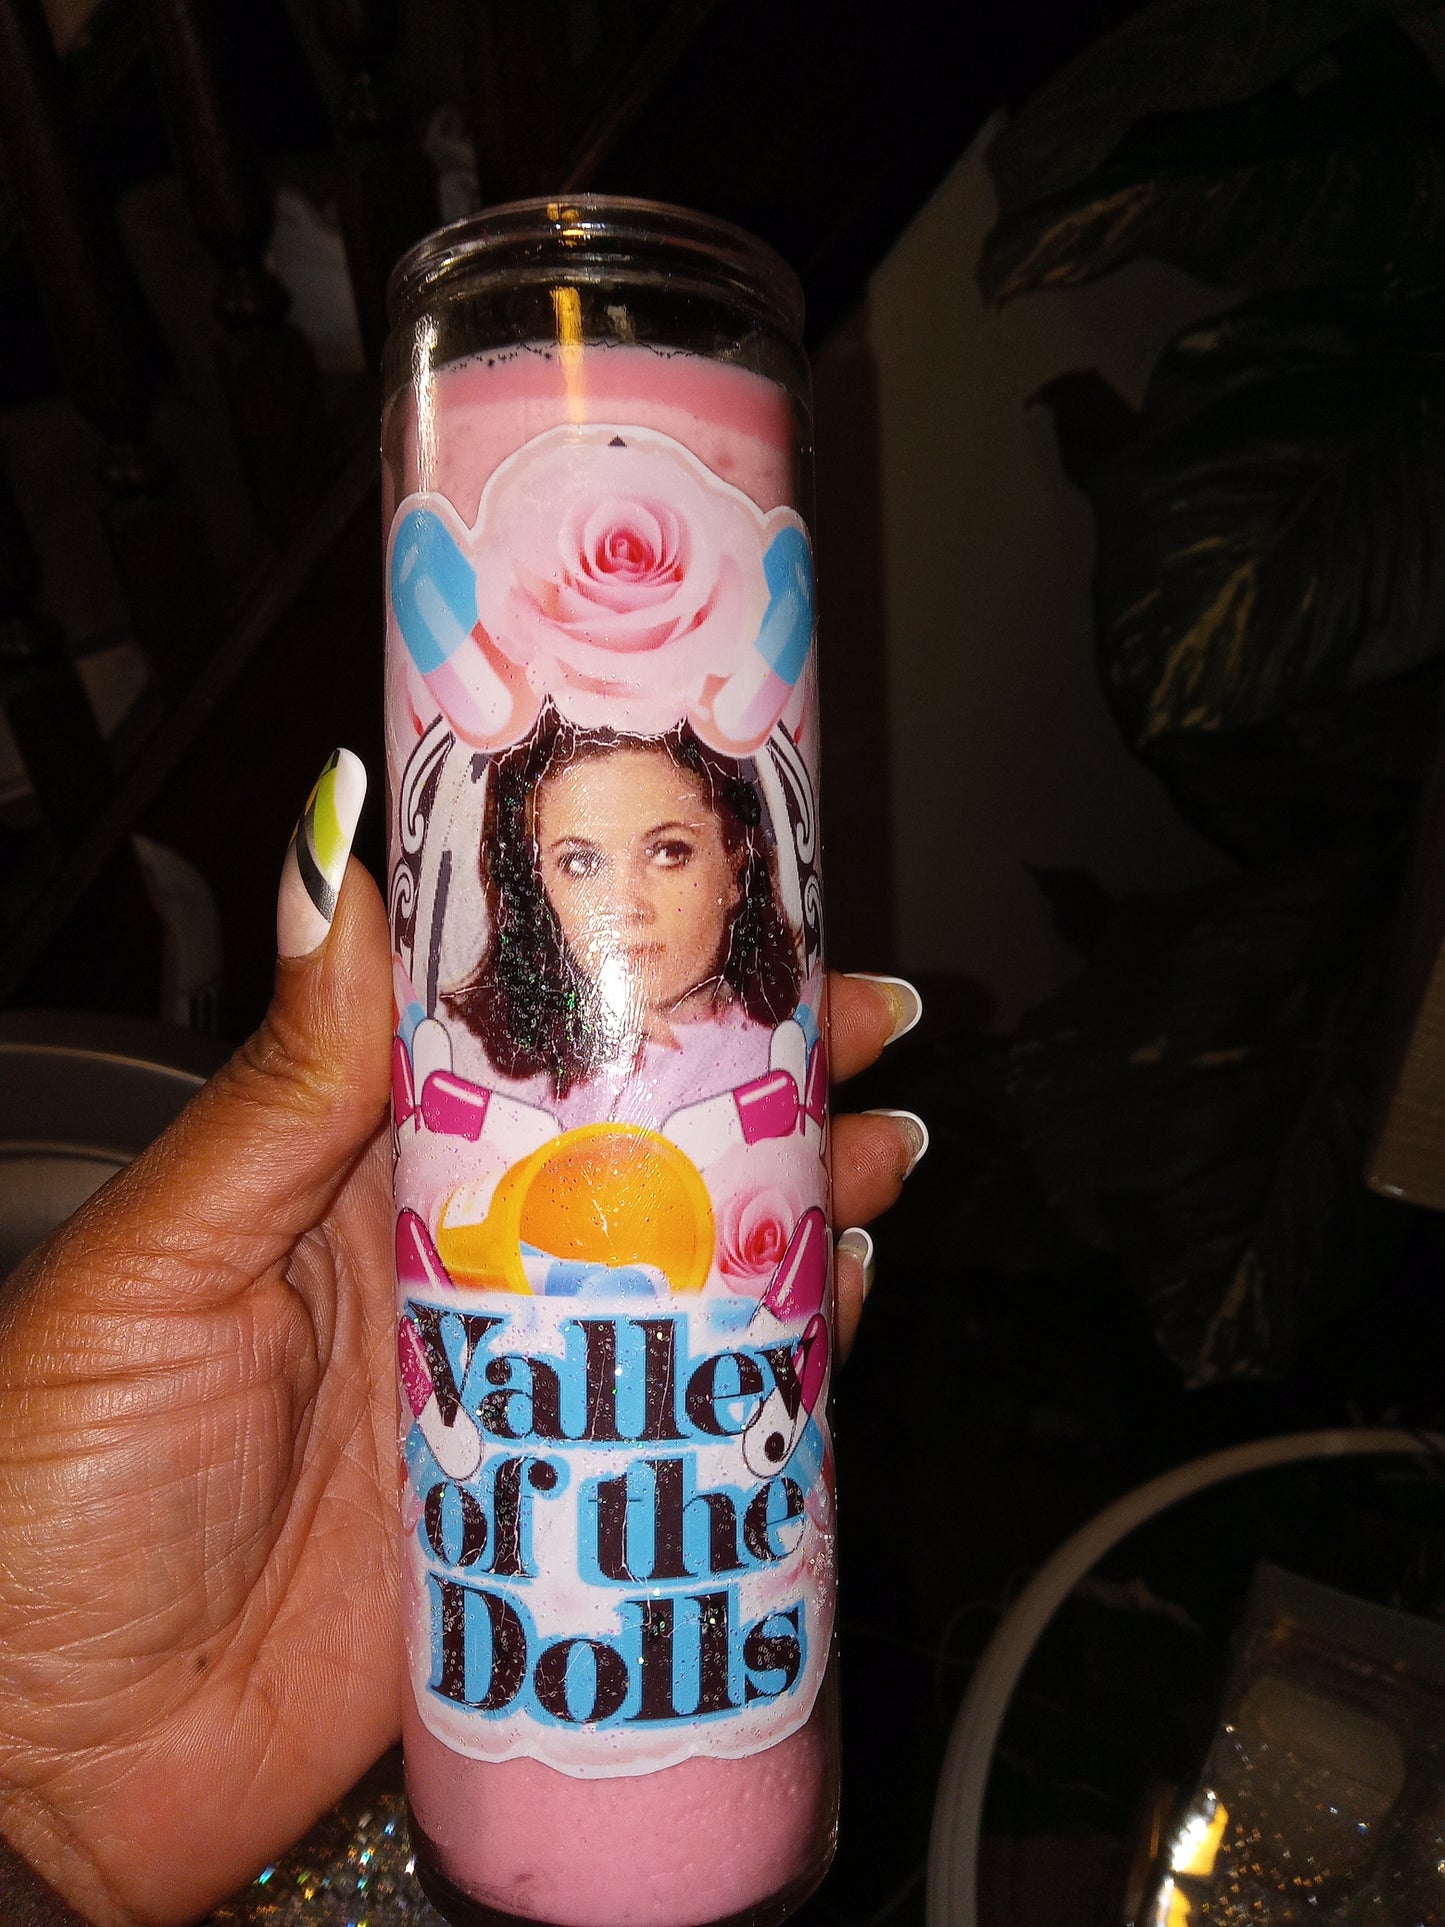 Valley of the Dolls Unscented pillar candles